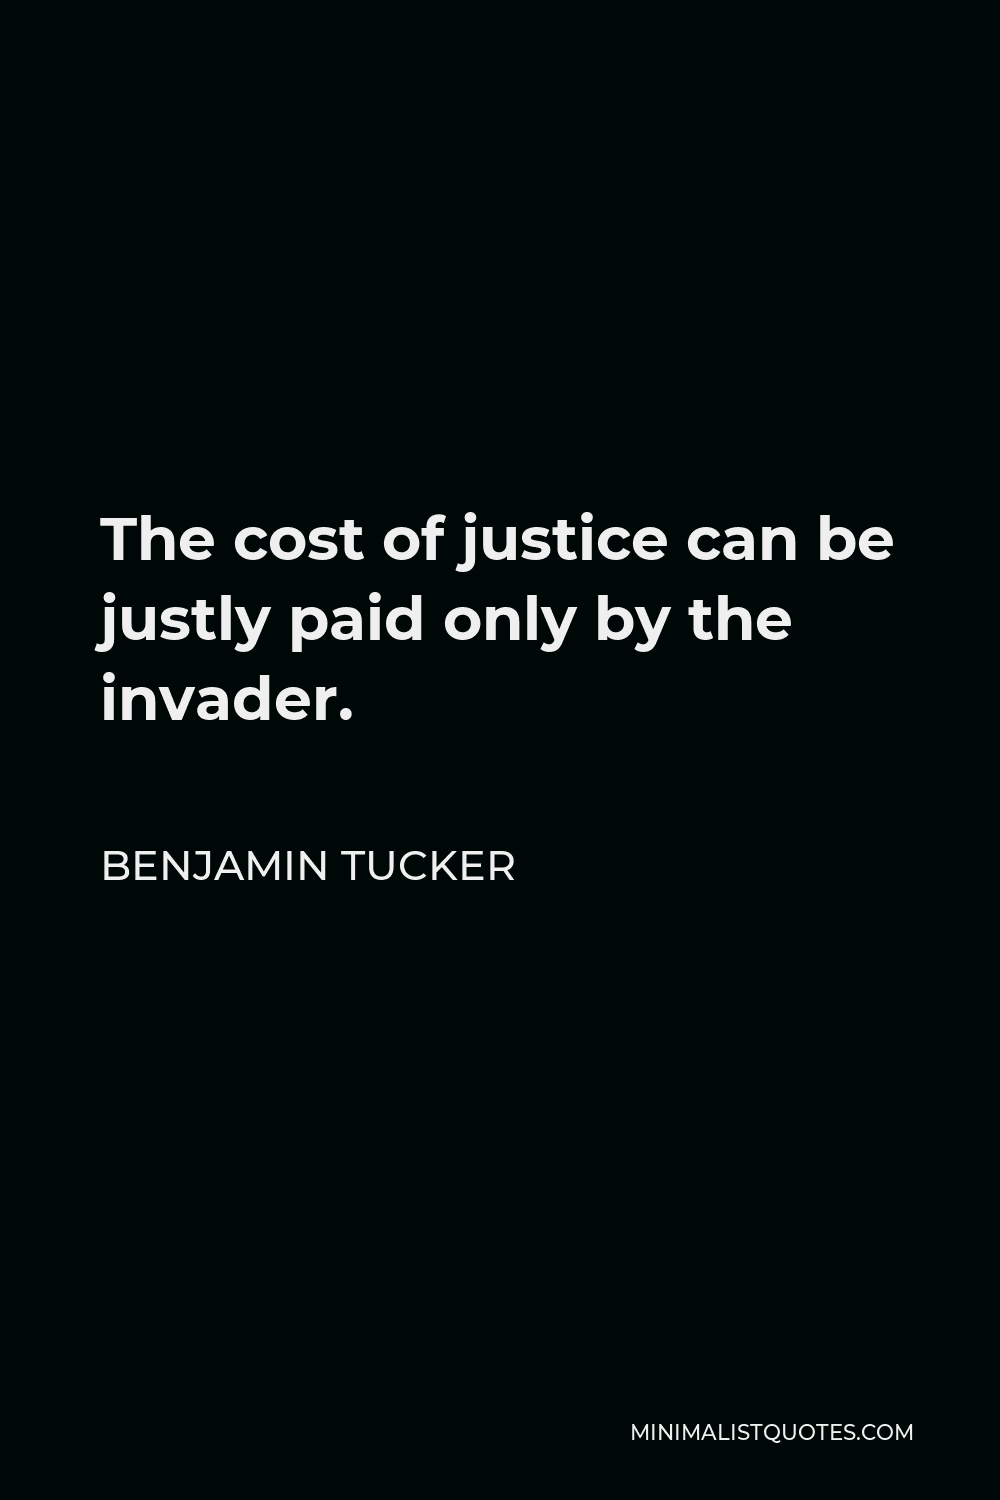 Benjamin Tucker Quote - The cost of justice can be justly paid only by the invader.